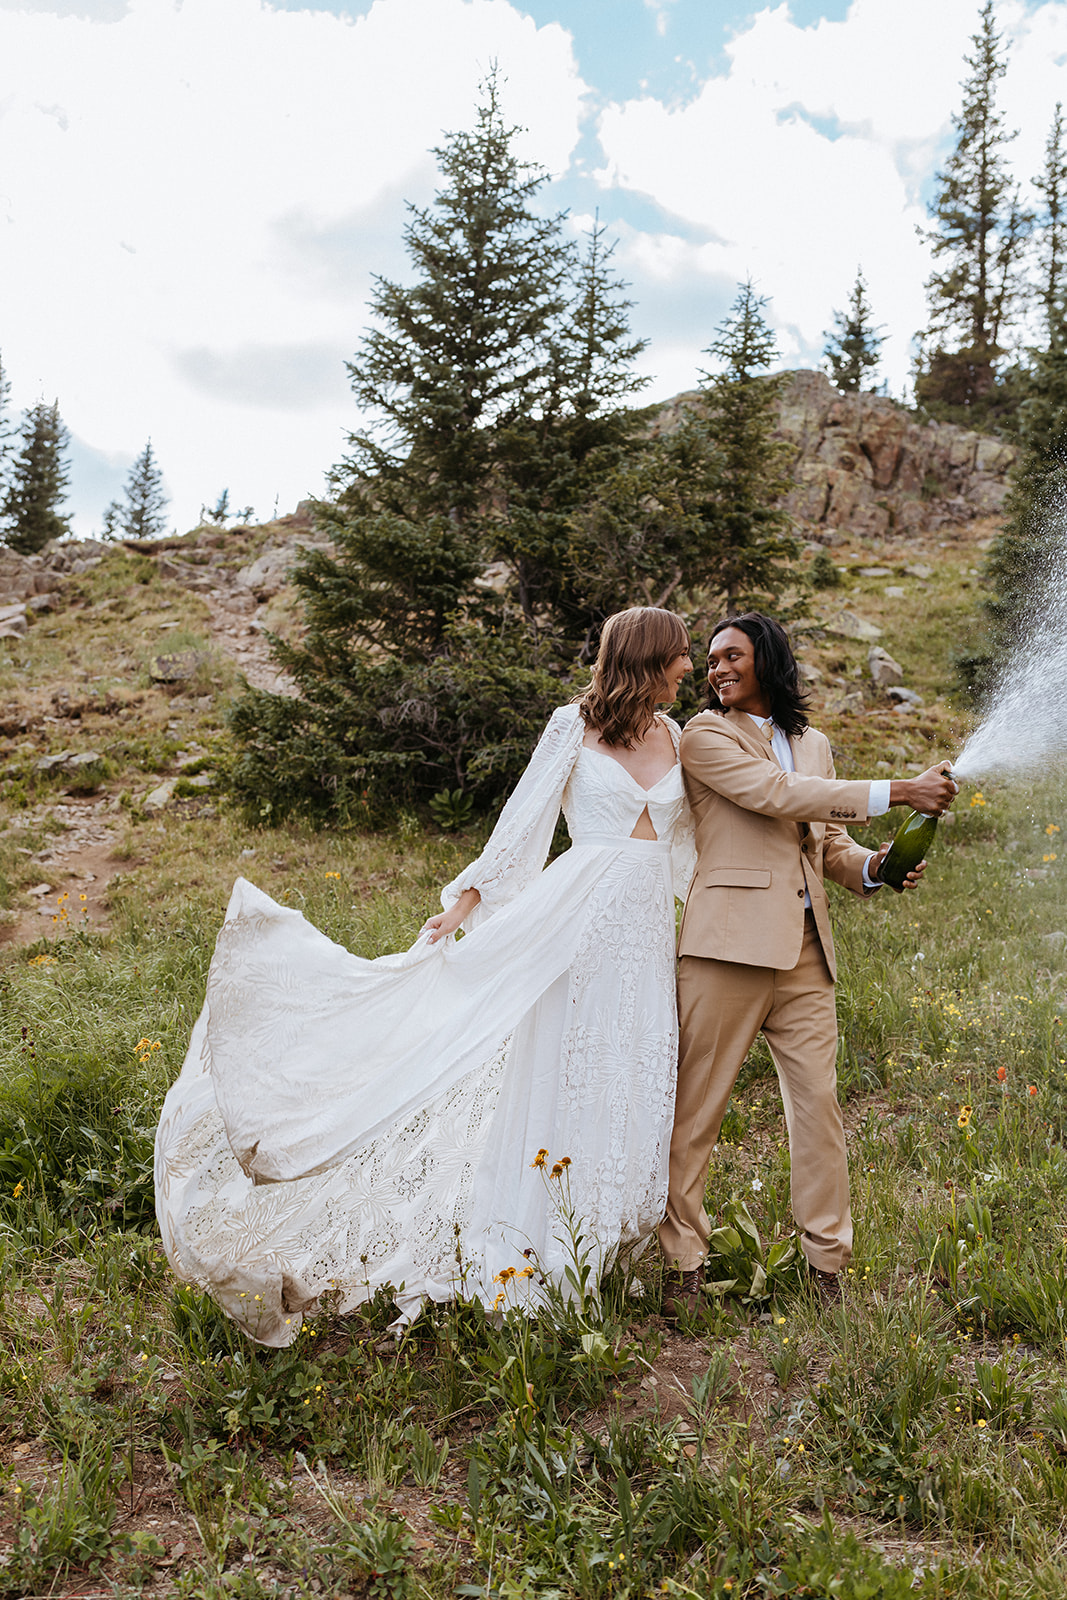 Newlyweds pop a bottle of champagne on a mountainside while smiling at each other